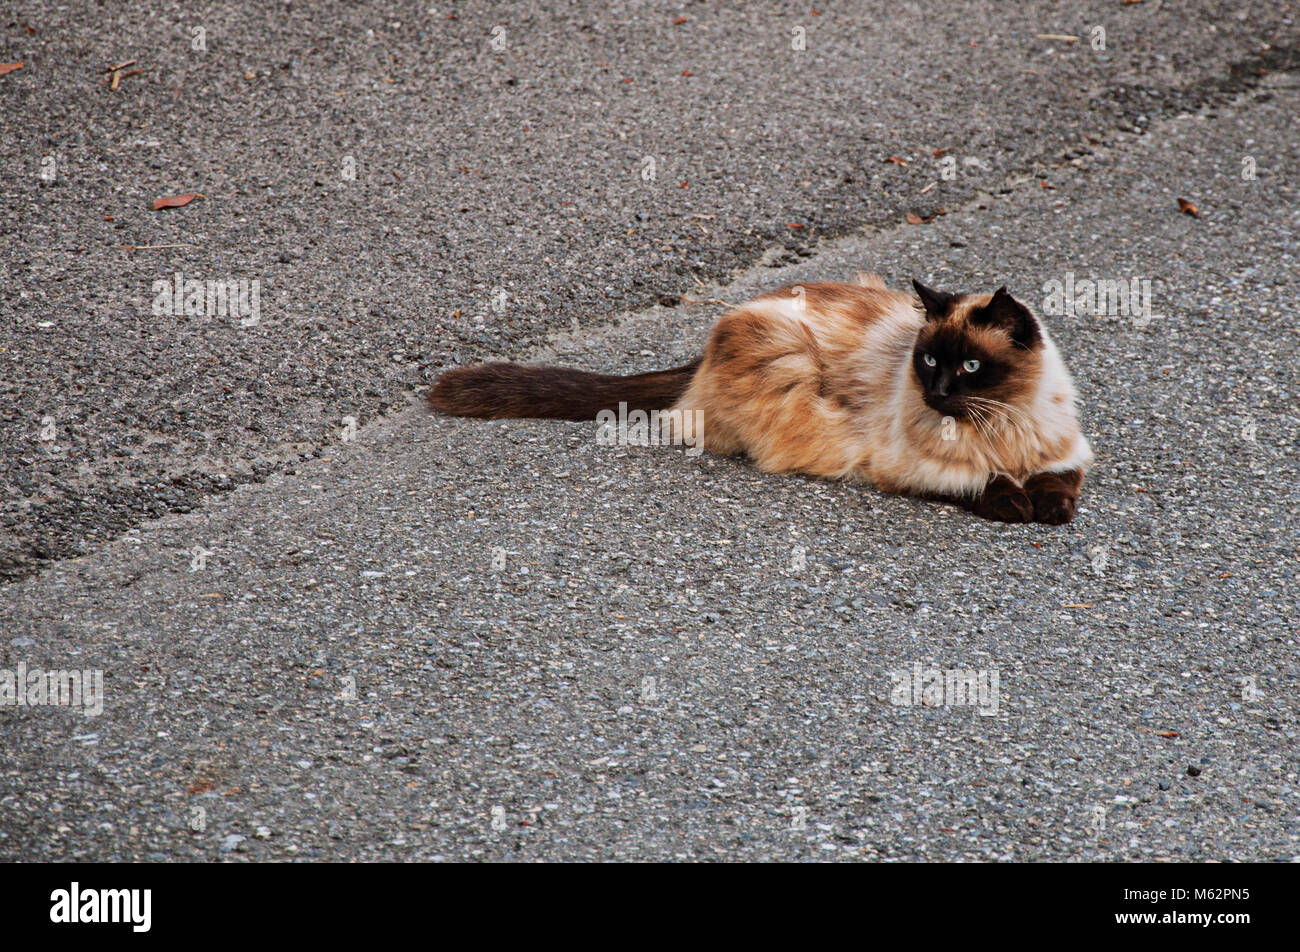 Furry cat lying on the street asphalt at Saint-Gervais-Les-Bains/Le Fayet. A famous French ski resort located near the Mont Blanc in Alps. Stock Photo